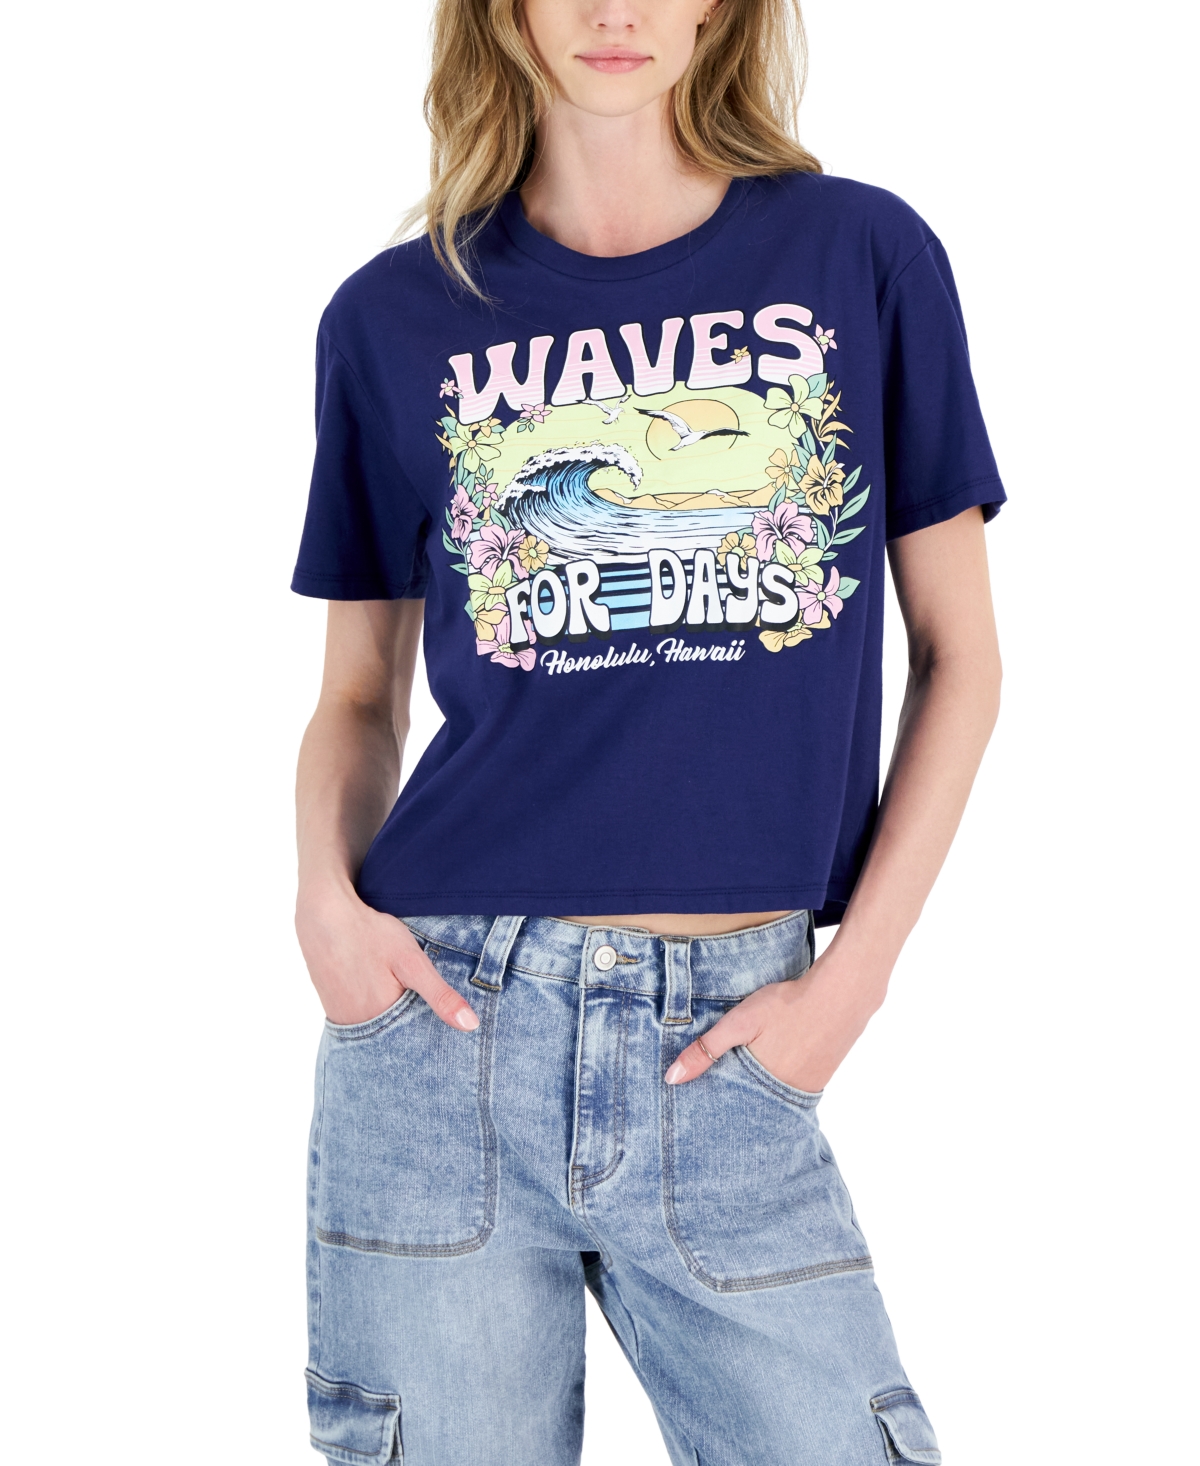 Juniors' Waves For Days Graphic T-Shirt - Twilight Blue